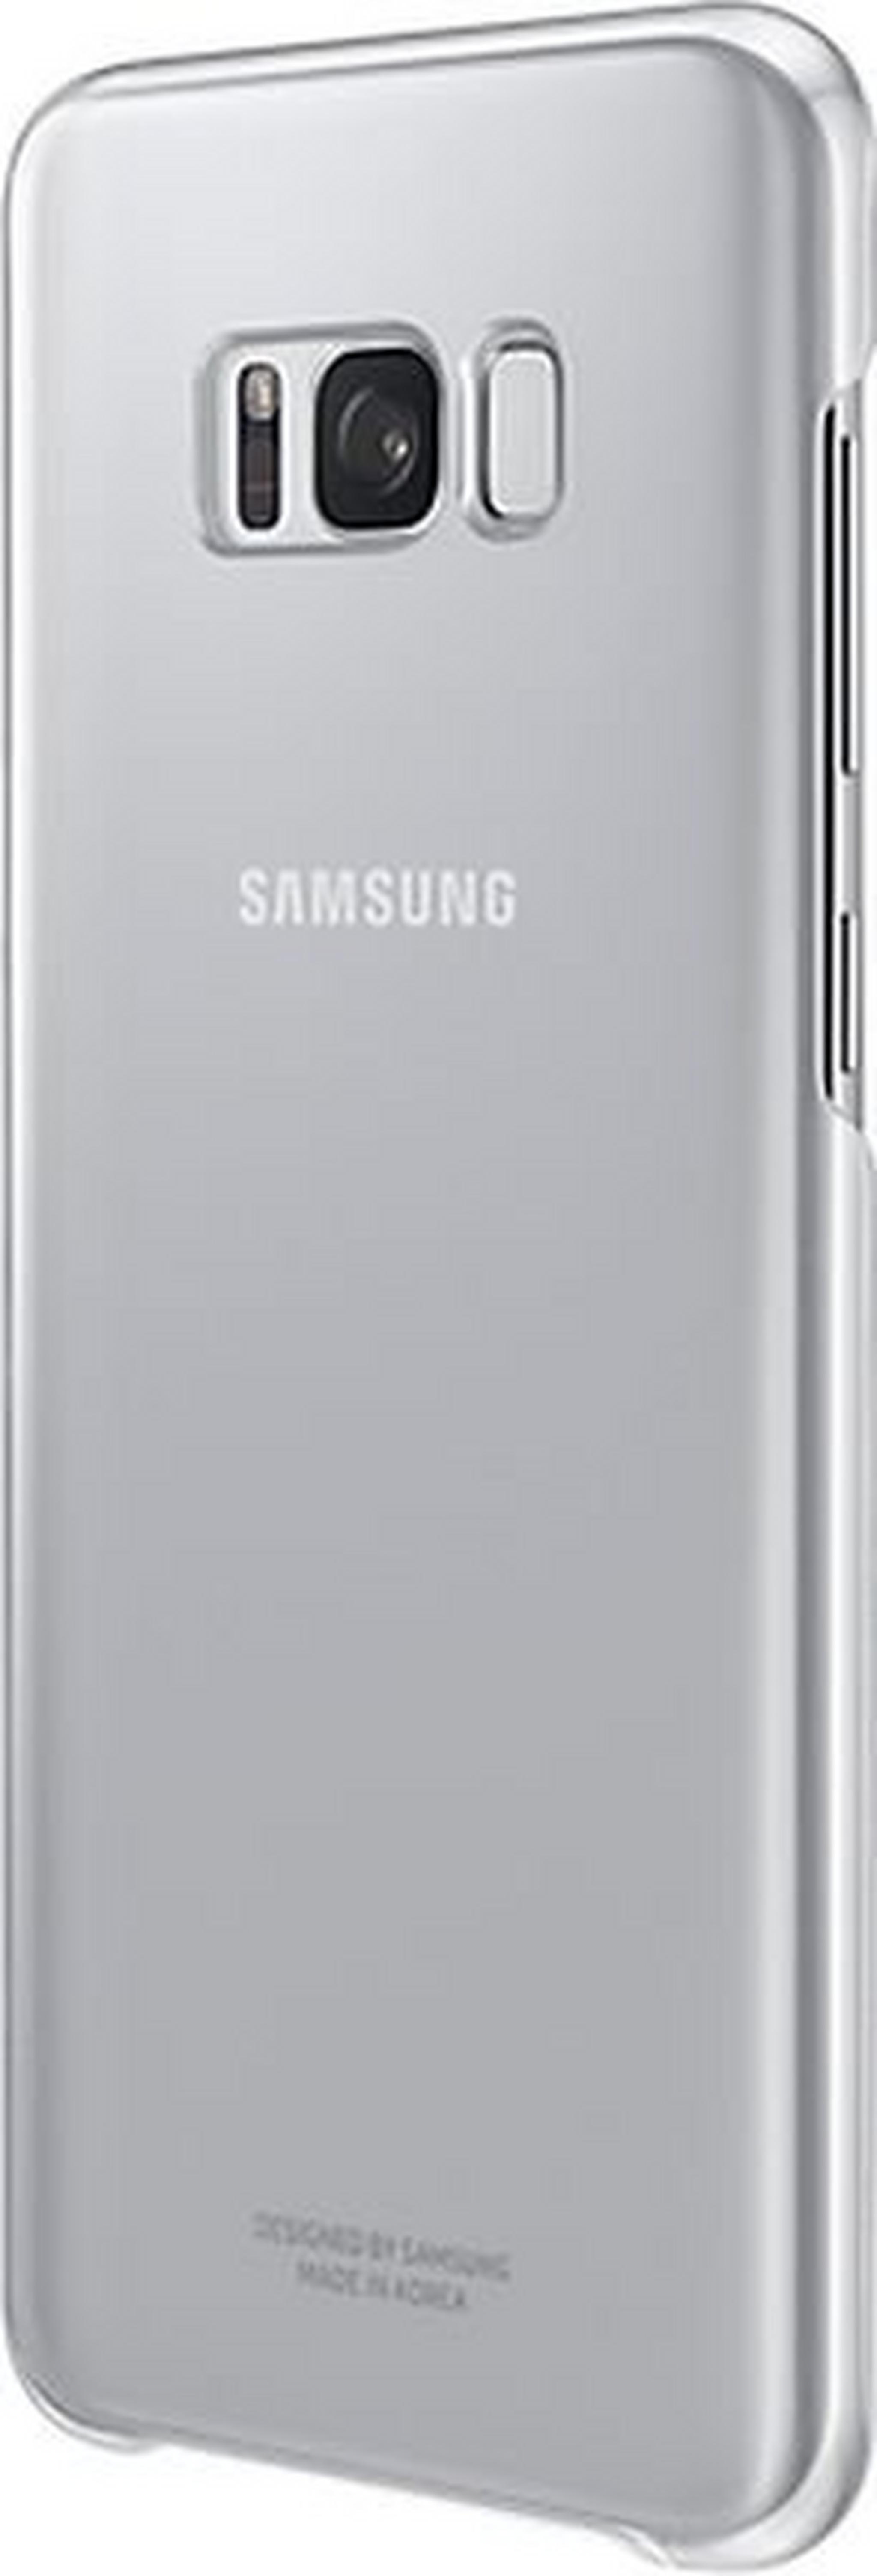 Samsung Clear Cover Case For Galaxy S8+ Silver